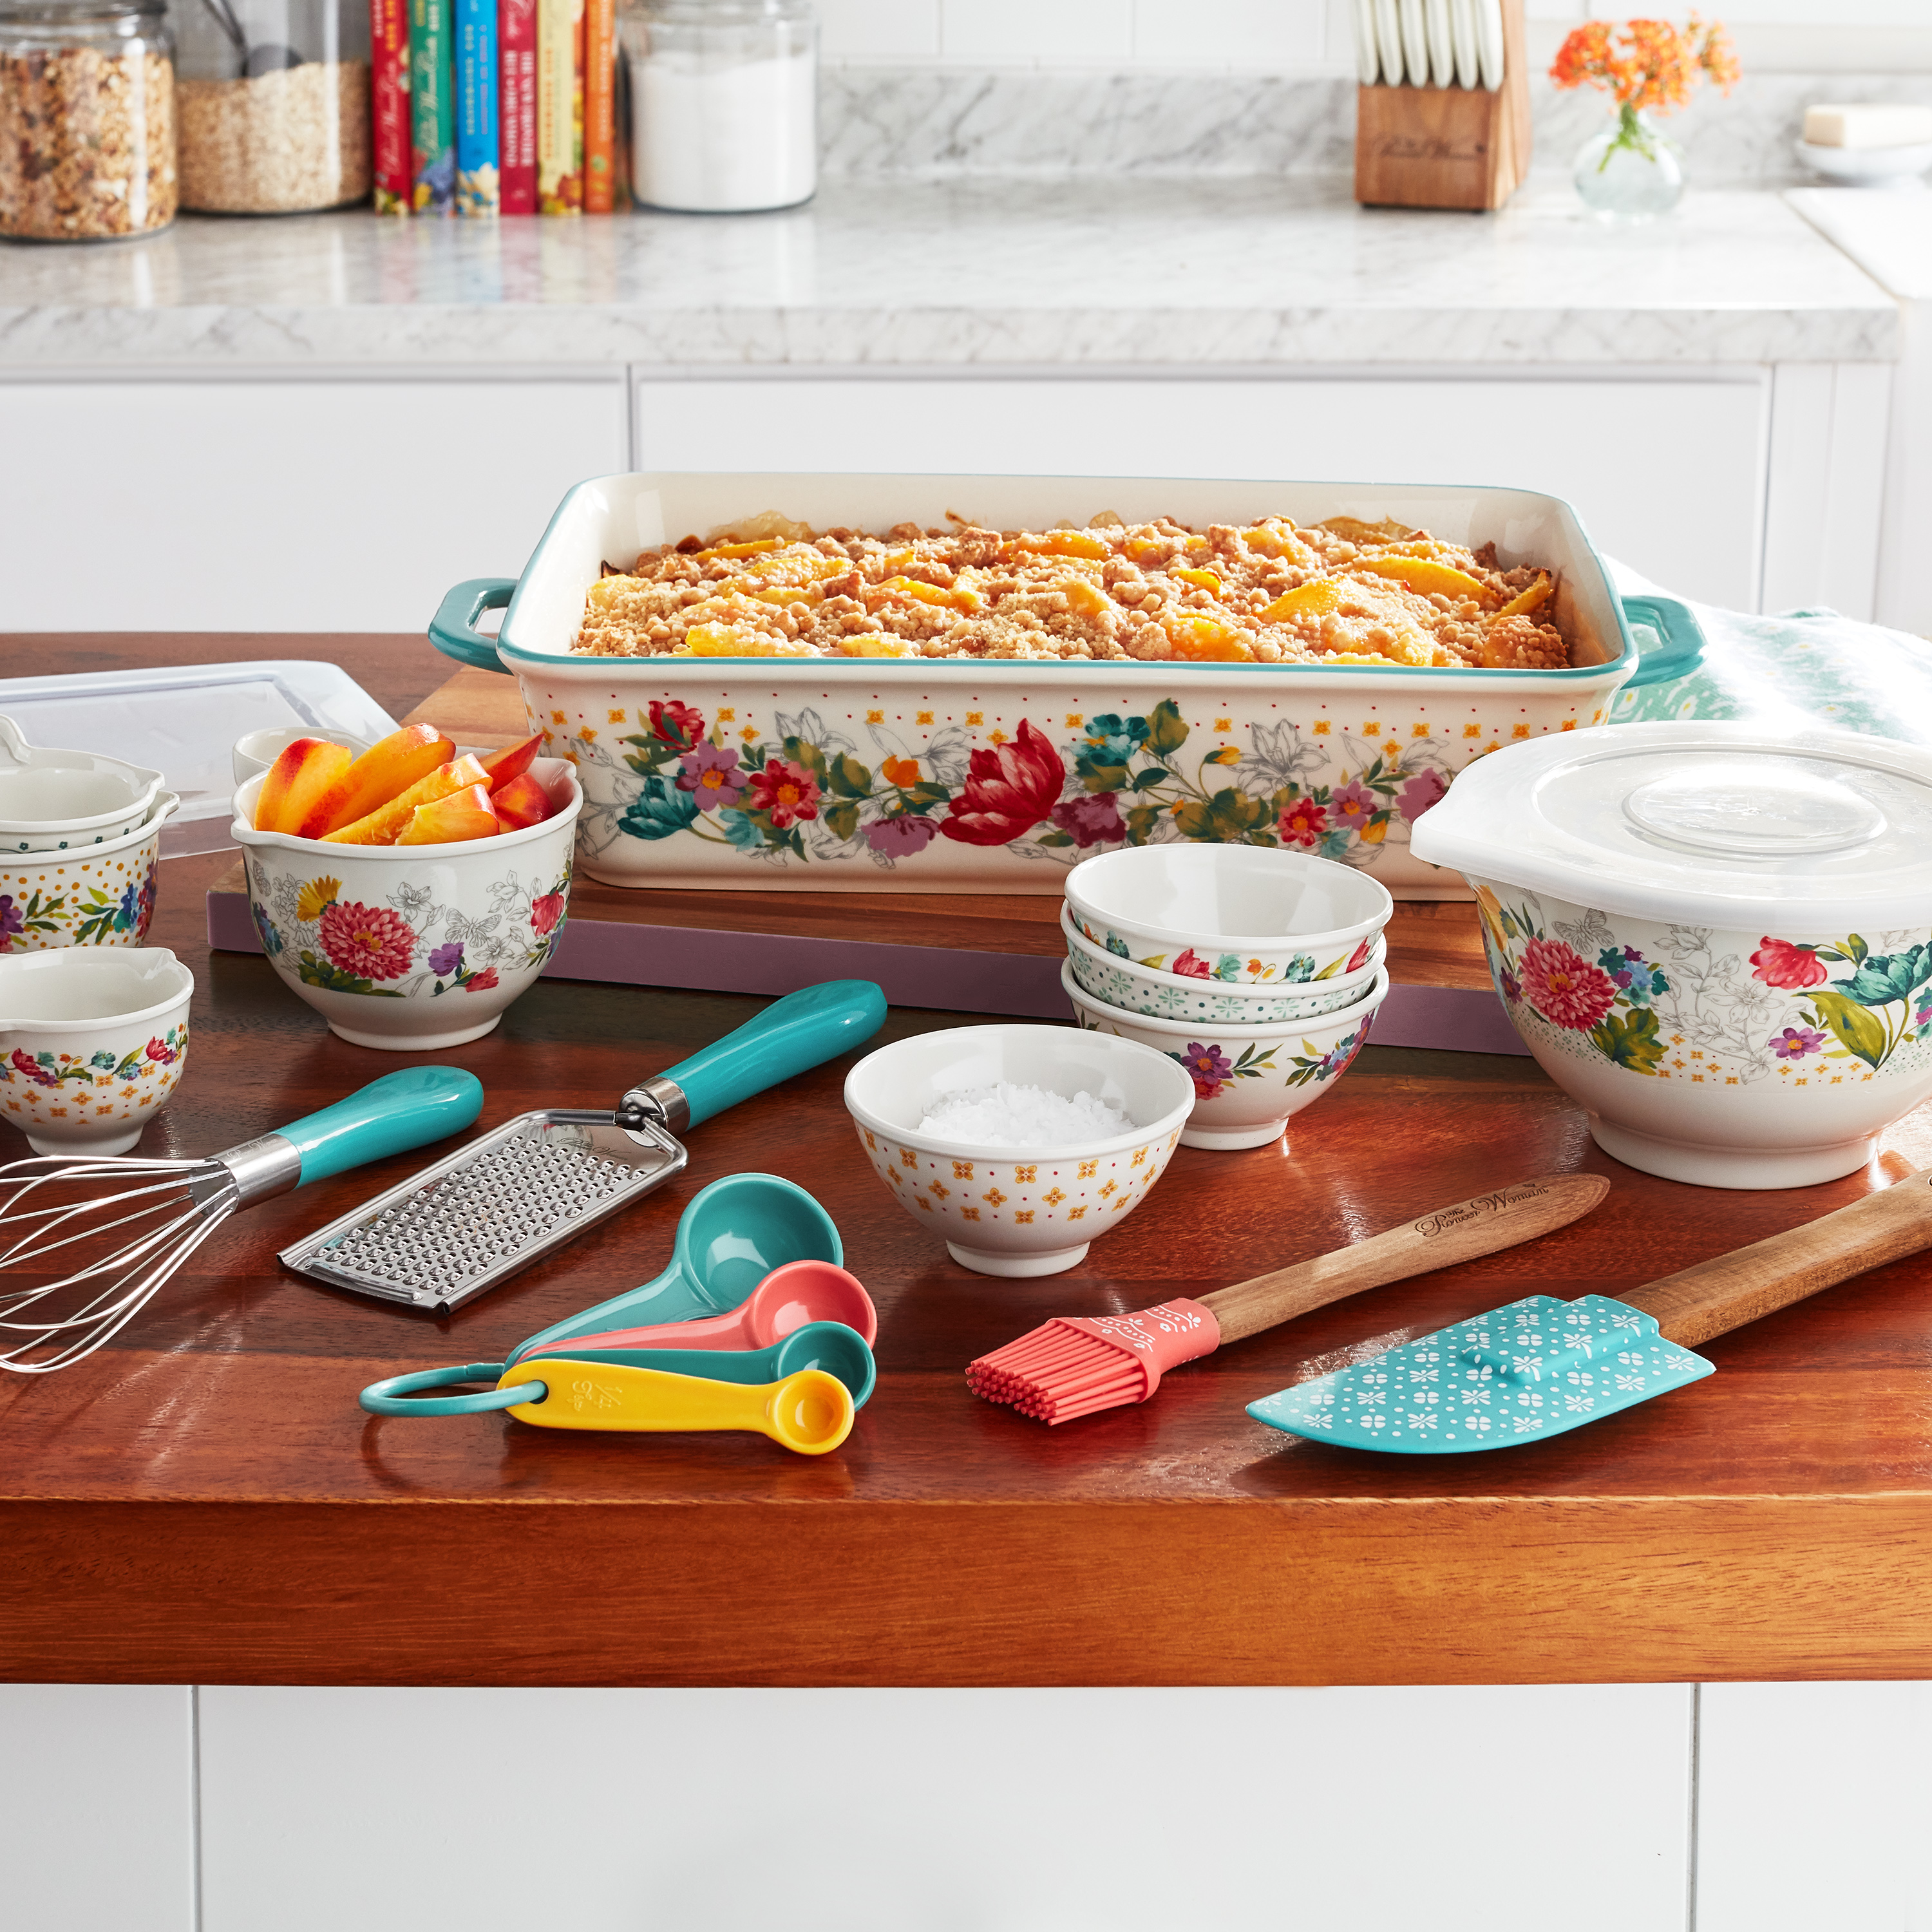 The Pioneer Woman Blooming Bouquet 20-Piece Bake & Prep Set with Baking Dish & Measuring Cups - image 8 of 8